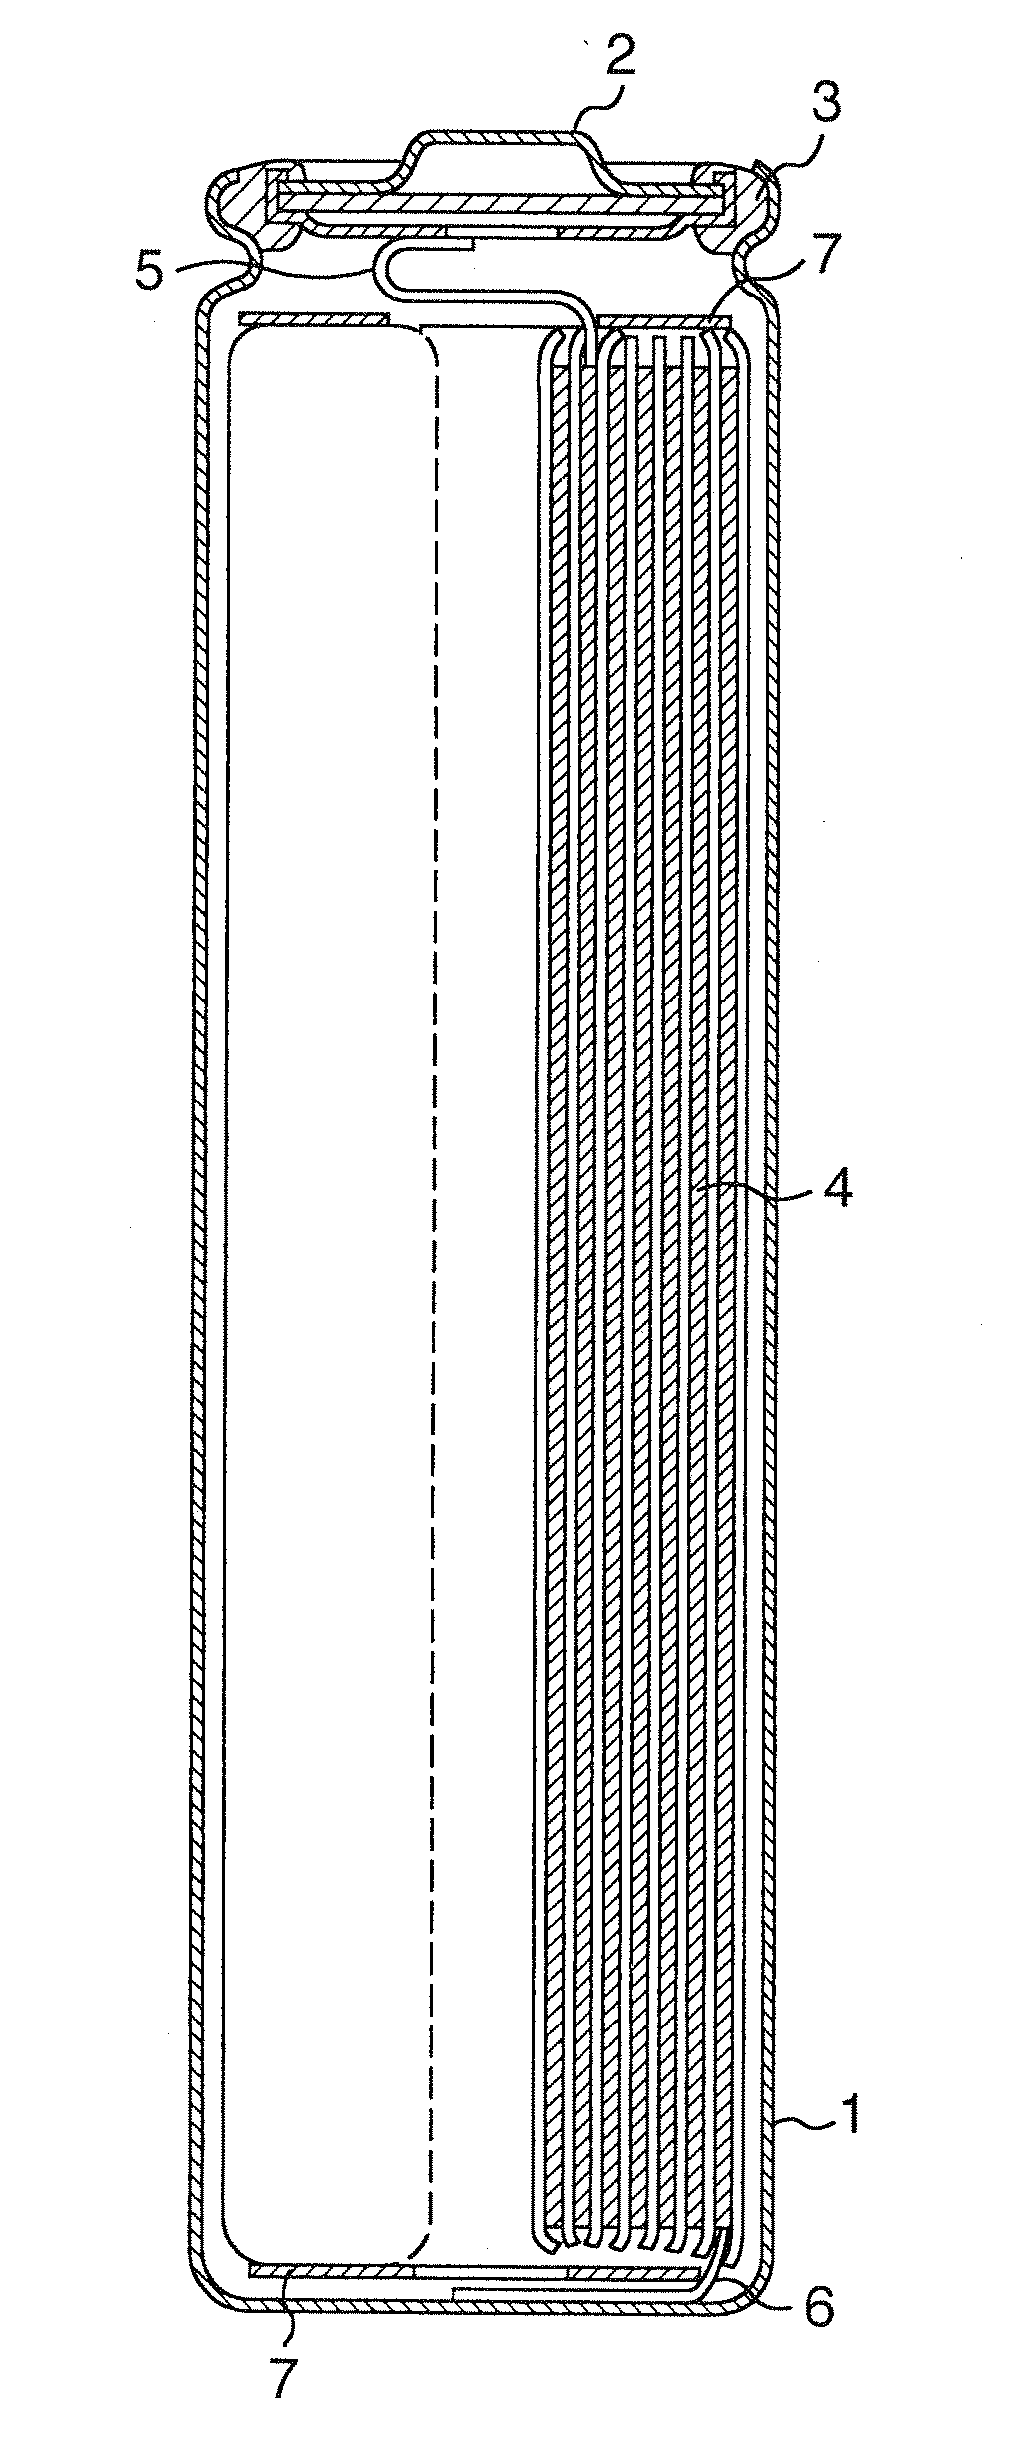 Non-aqueous electrolyte secondary batteries and devices using the same